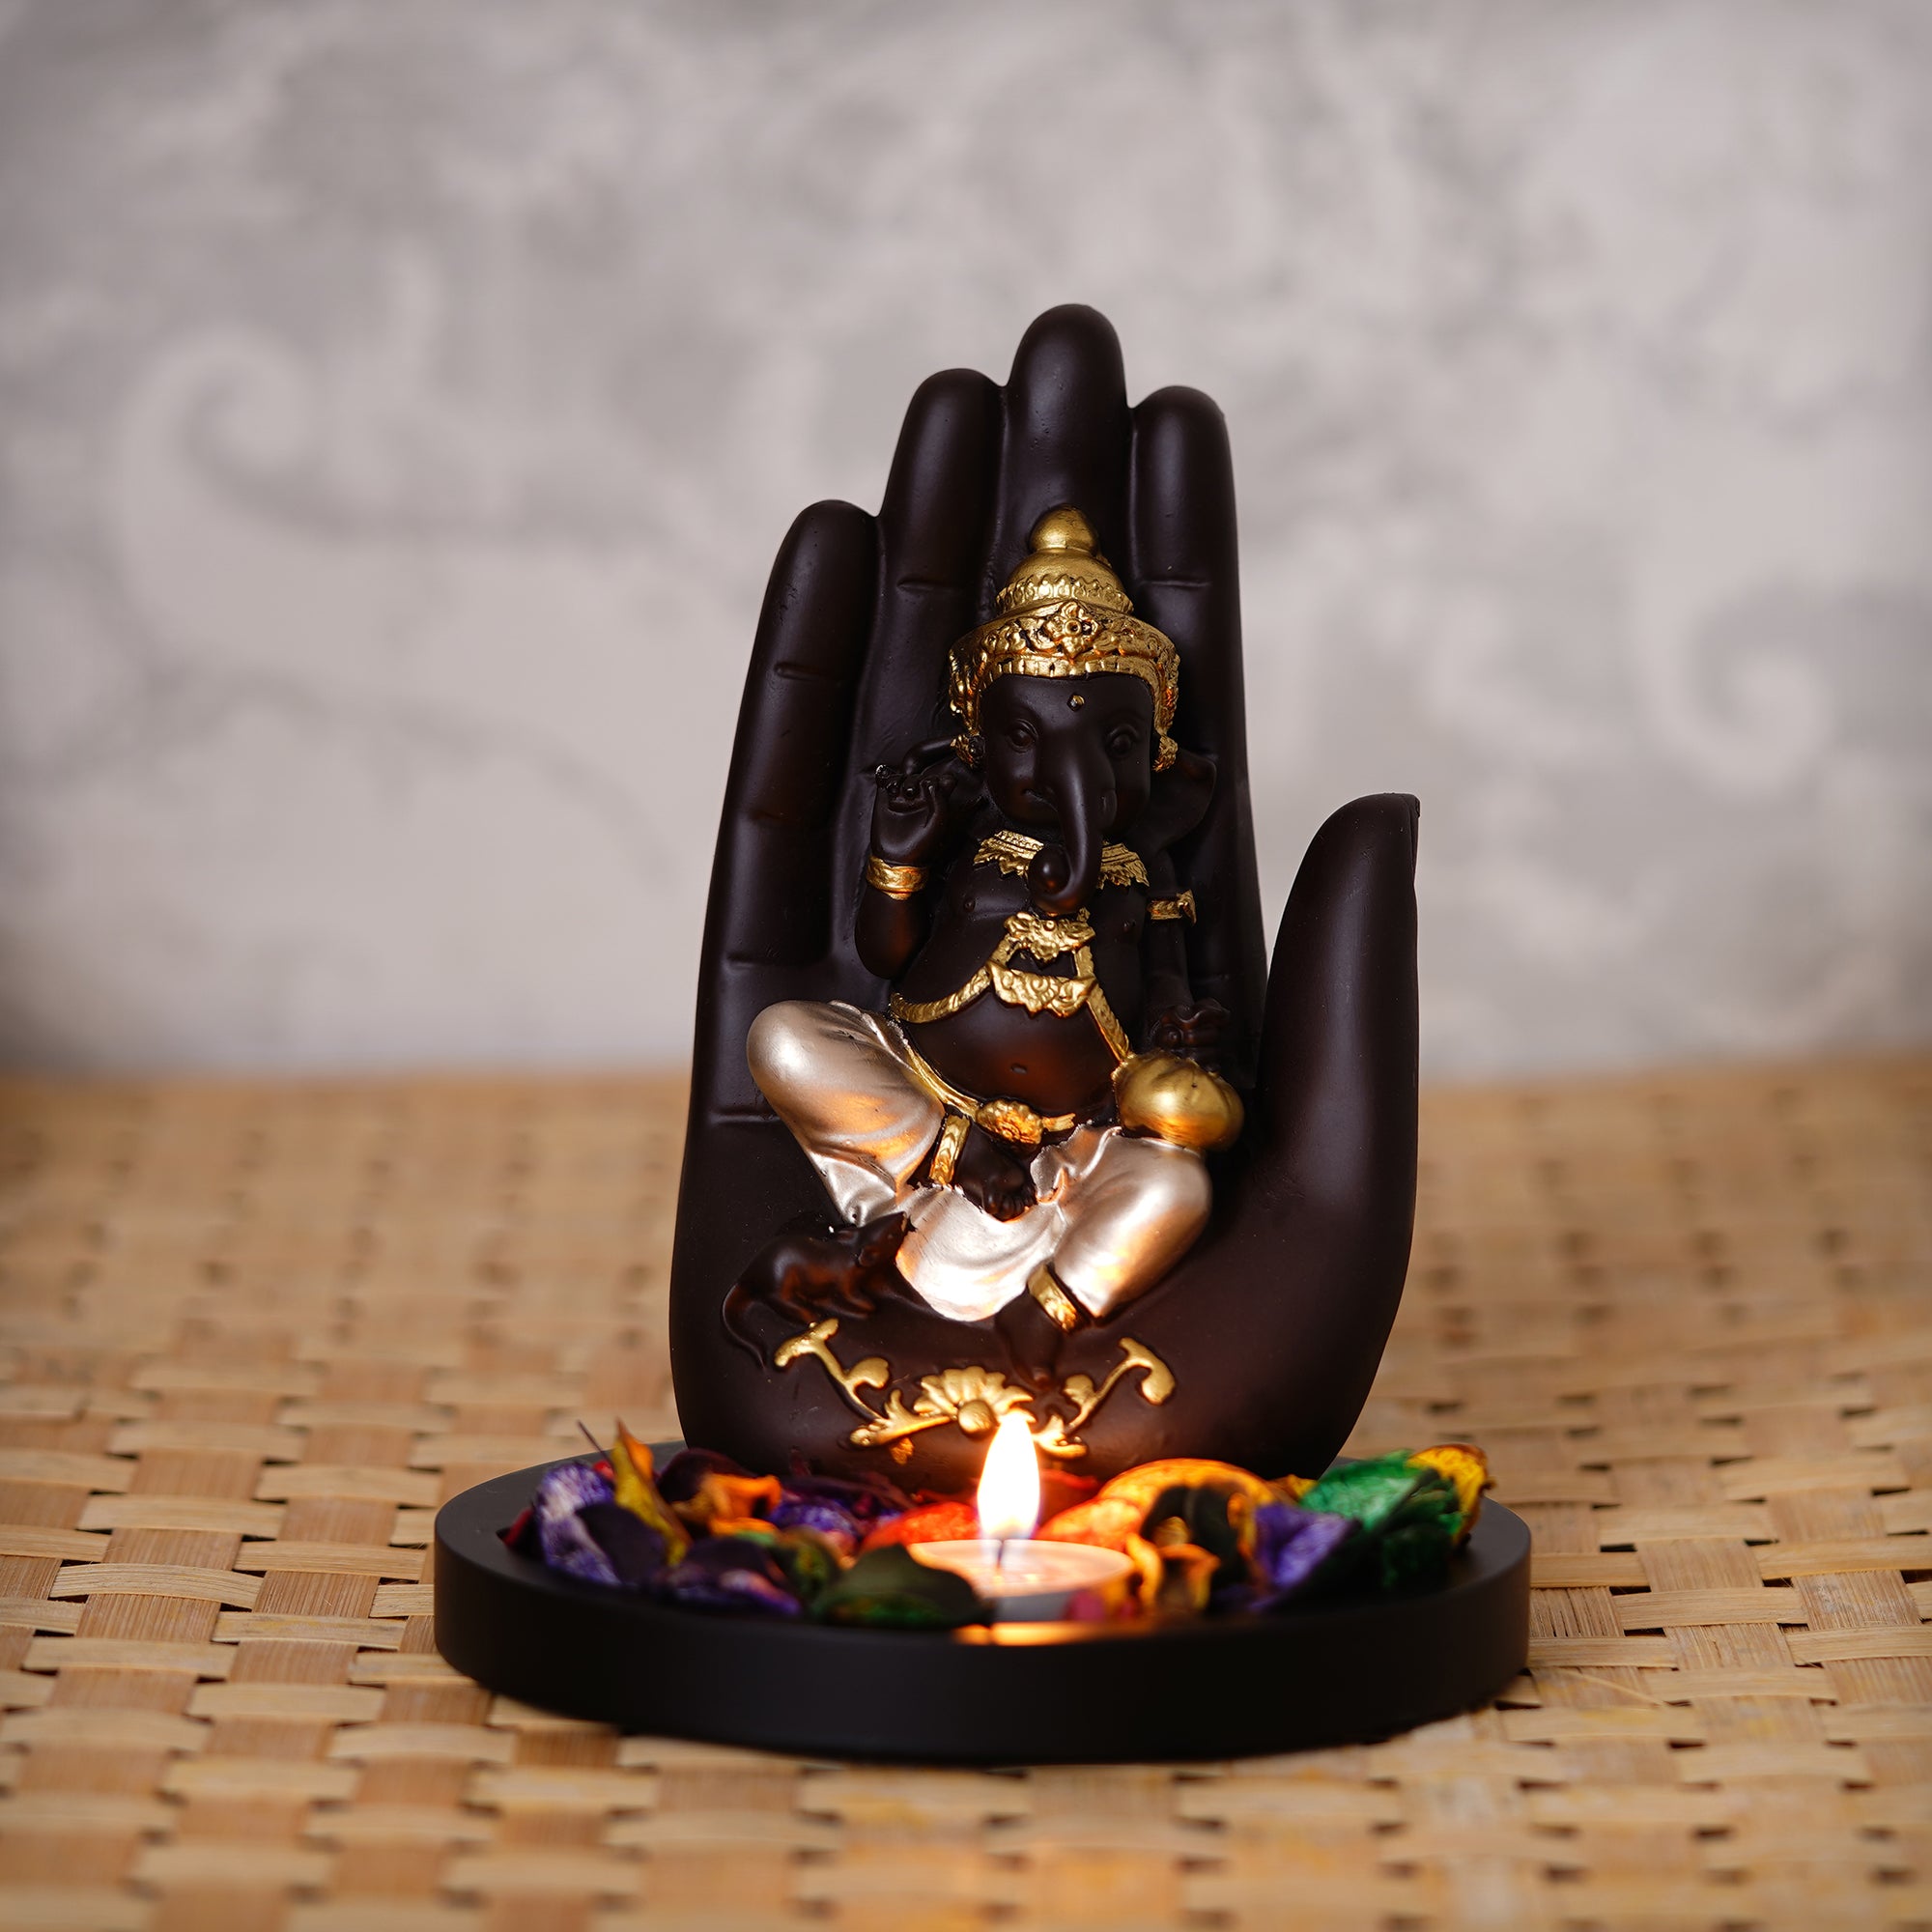 Golden and Black Handcrafted Palm Ganesha Idol on Wooden Base with Fragranced Petals Tealight Candle Holder